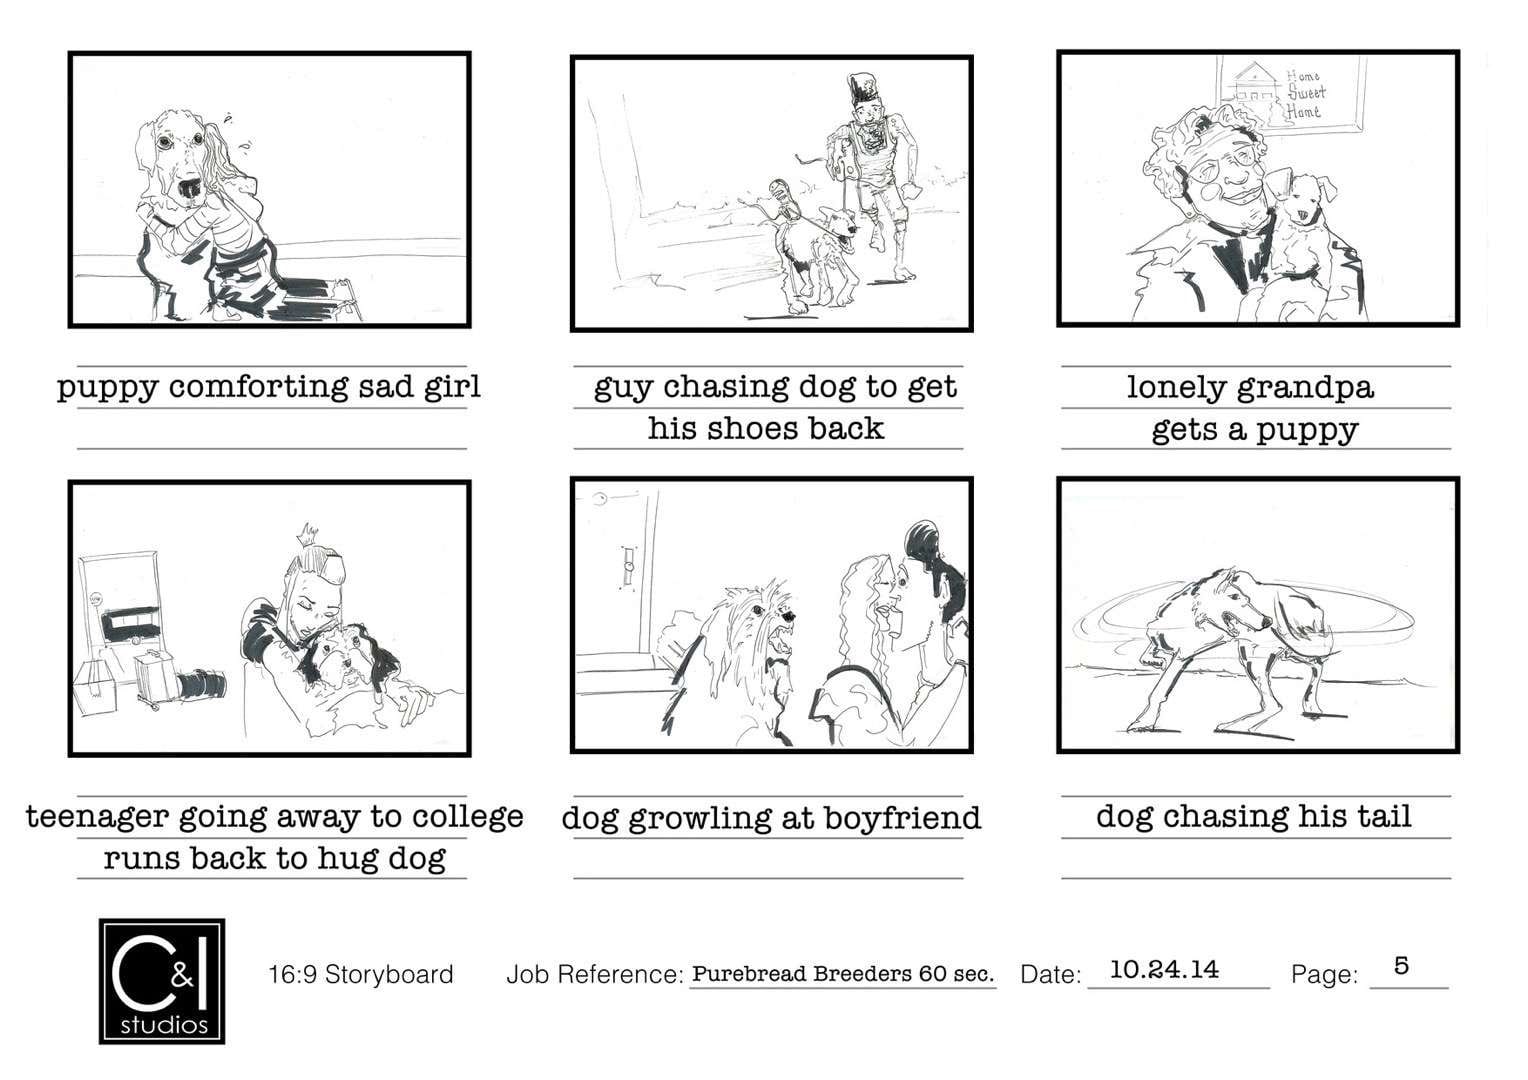 Storyboard art for Purebred Breeders Page 5